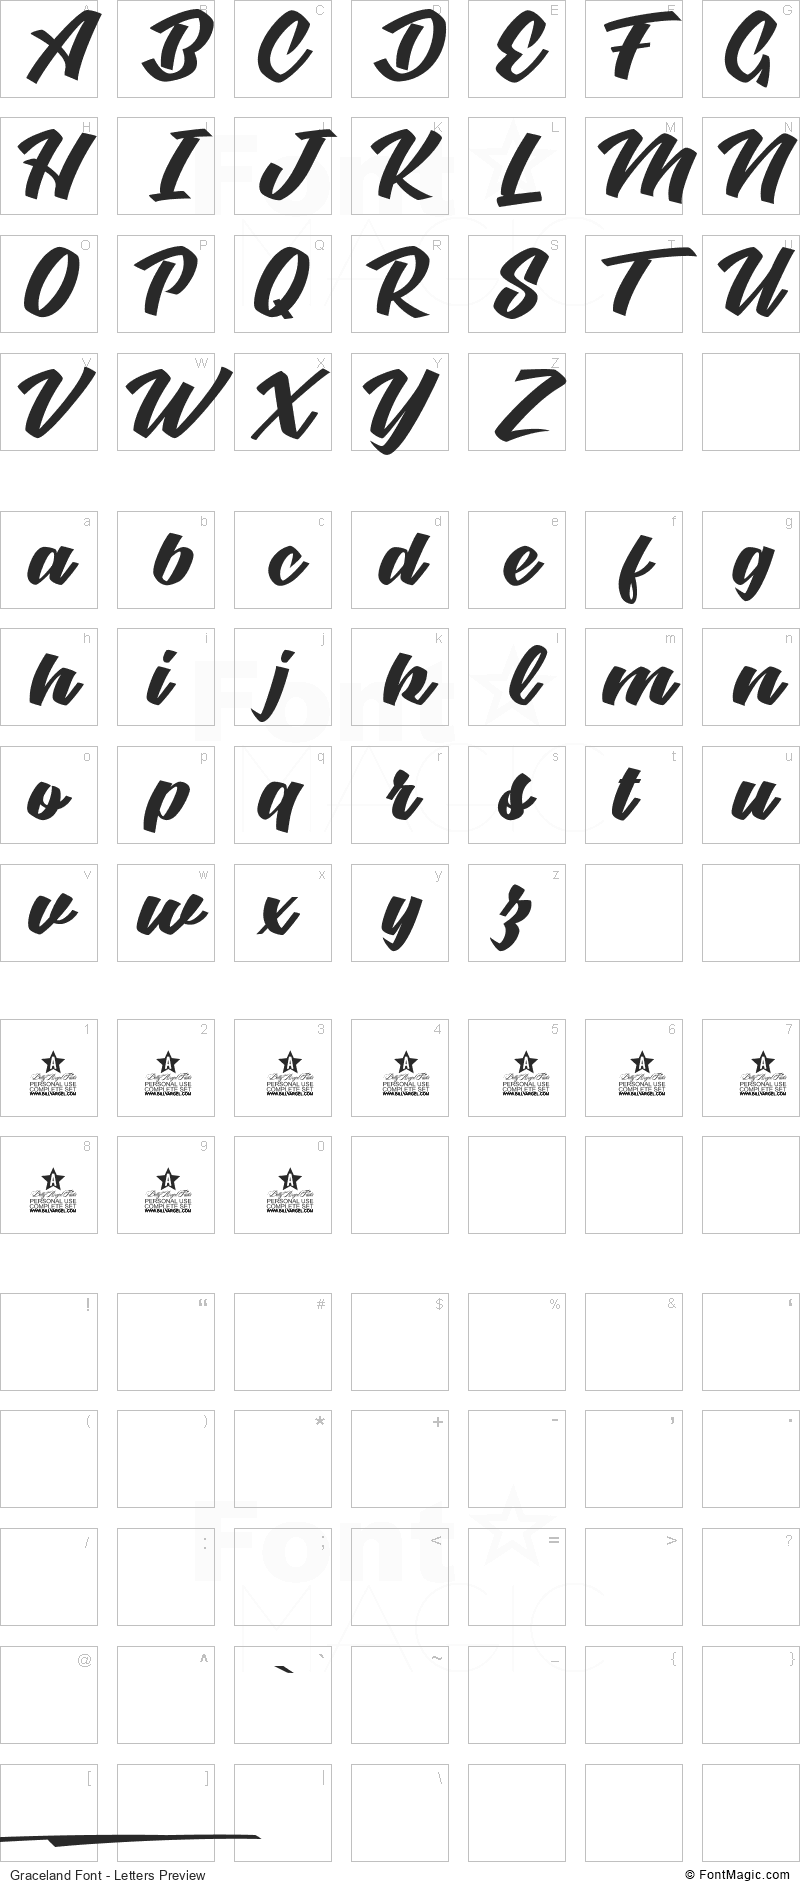 Graceland Font - All Latters Preview Chart